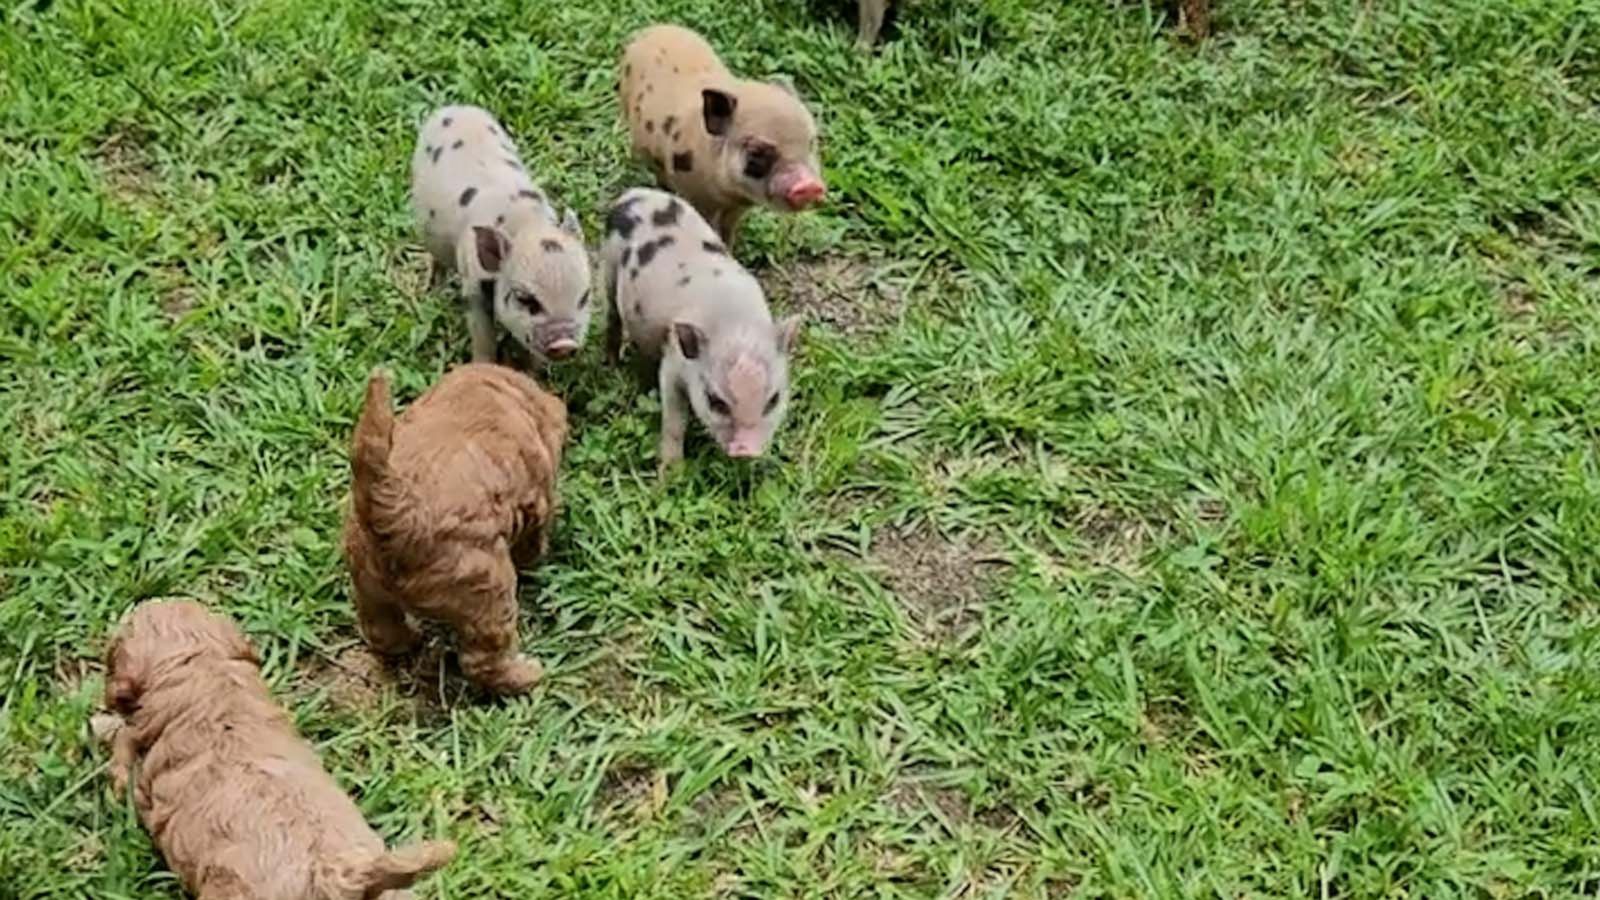 VIDEO: Puppies and mini pigs become newfound friends